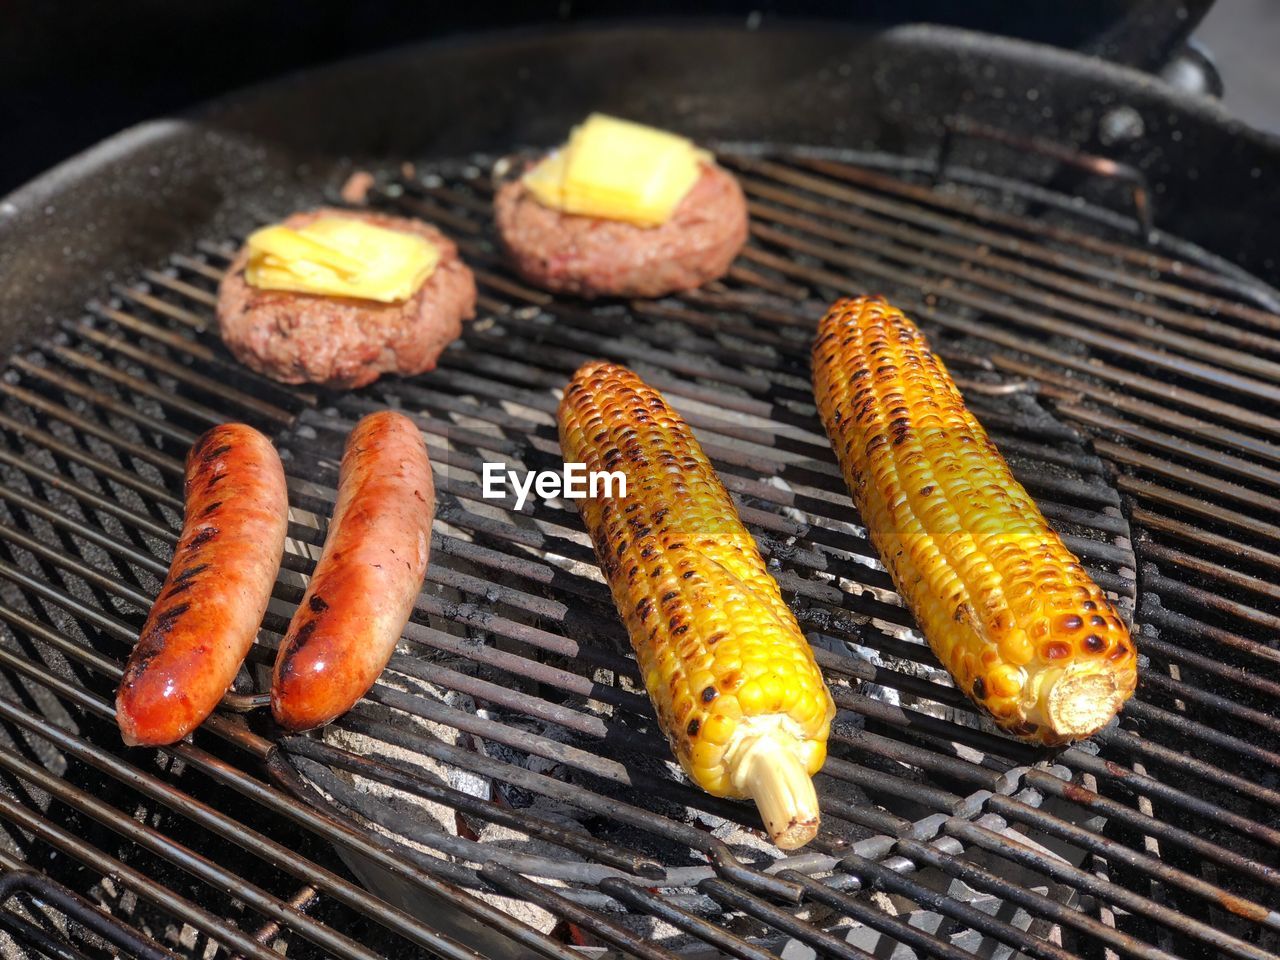 High angle view of meat and corns on barbecue grill